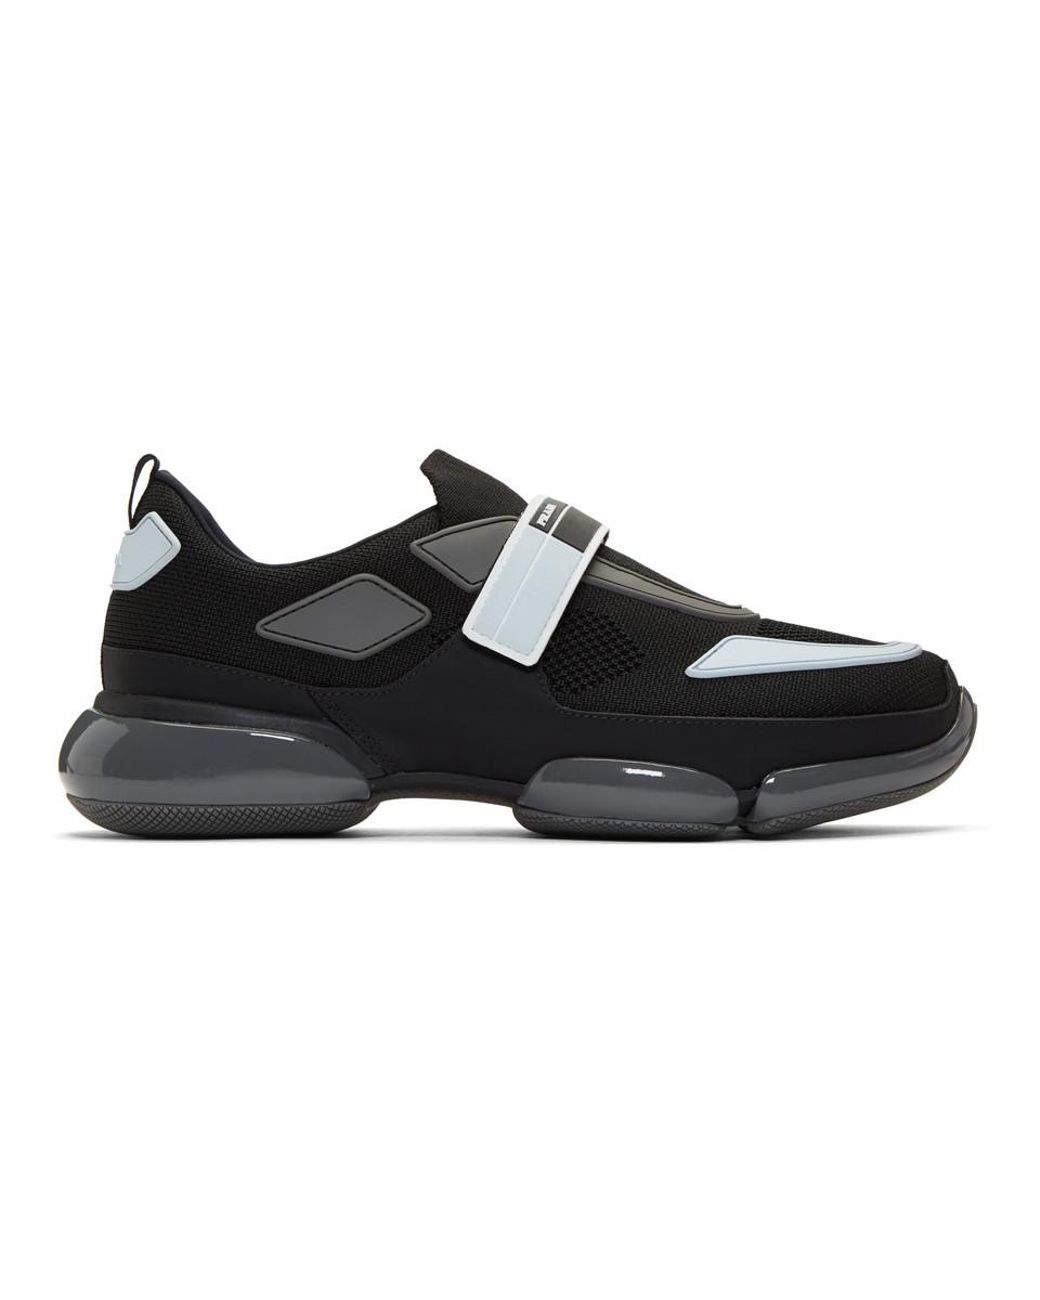 Prada Leather Black And Grey Cloudbust Sneakers for Men | Lyst